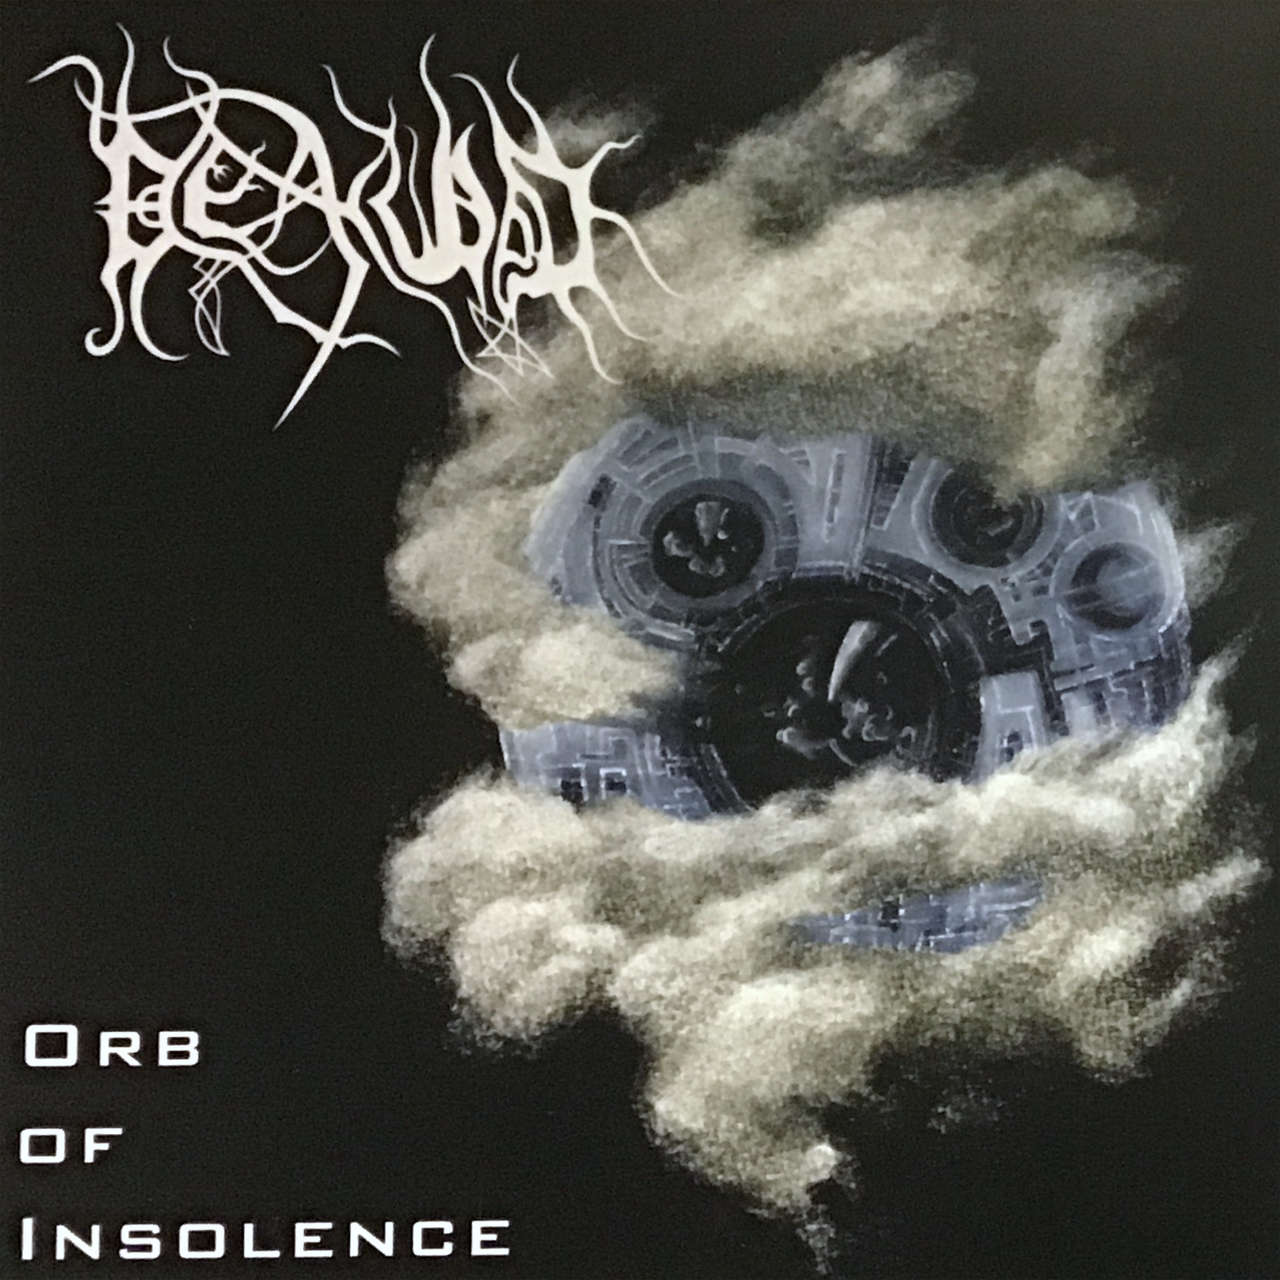 Lampades / Bleakwood - B / Orb of Insolence (EP)